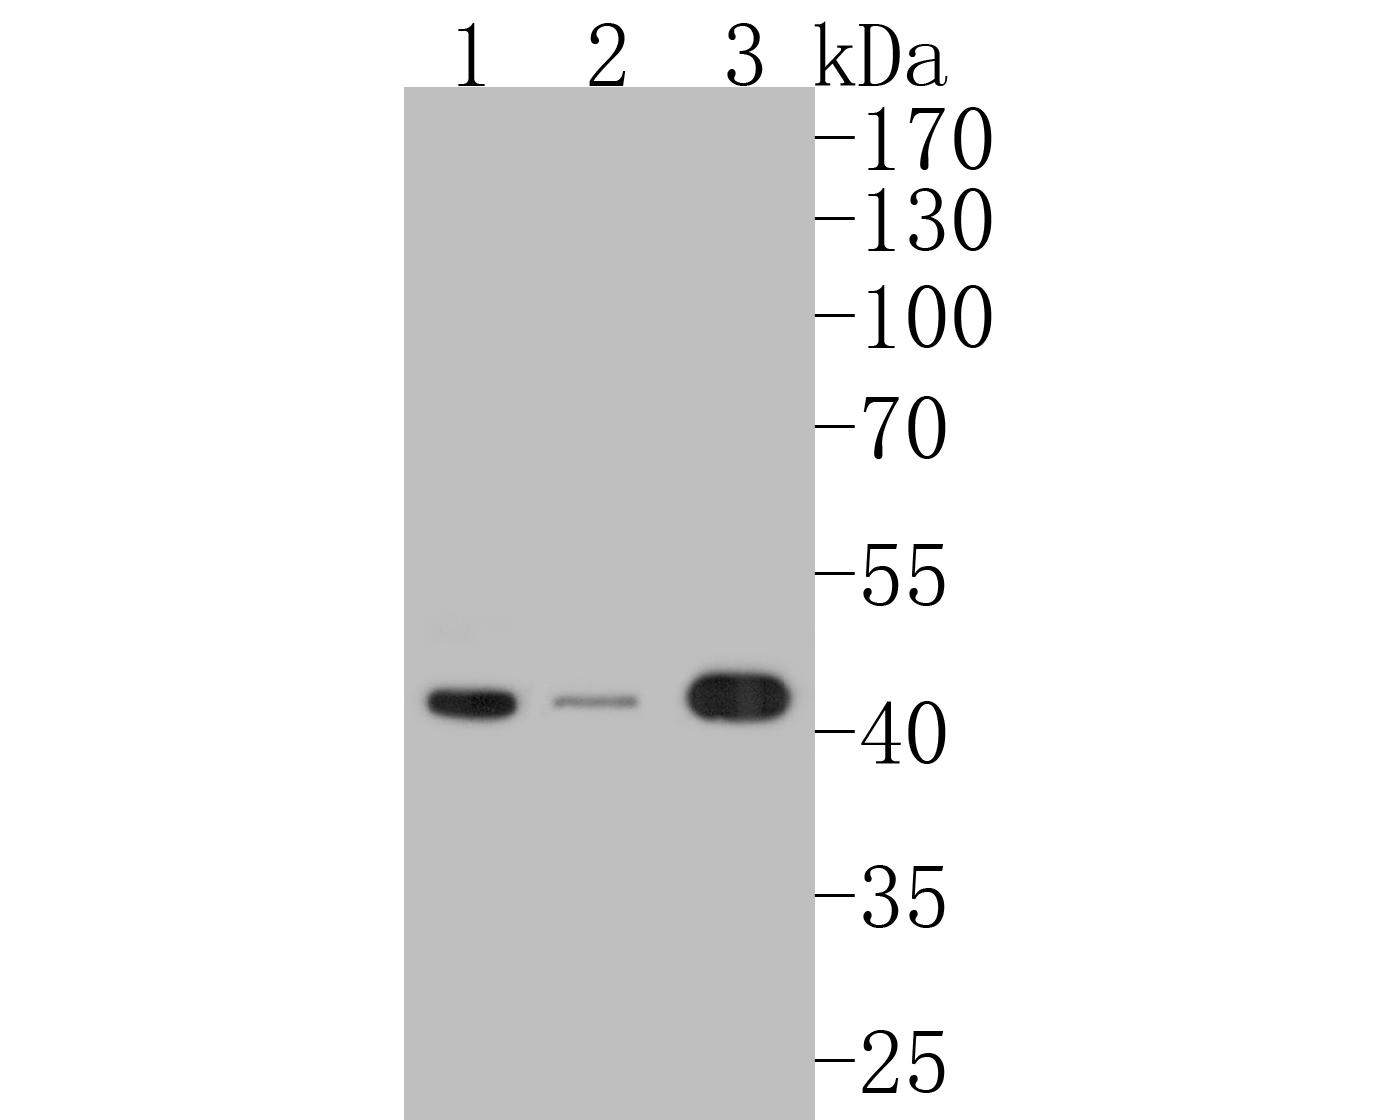 Western blot analysis of Phospho-MEK1 (S218 + S222) on different lysates. Proteins were transferred to a PVDF membrane and blocked with 5% BSA in PBS for 1 hour at room temperature. The primary antibody (ET1609-50, 1/500) was used in 5% BSA at room temperature for 2 hours. Goat Anti-Rabbit IgG - HRP Secondary Antibody (HA1001) at 1:5,000 dilution was used for 1 hour at room temperature.<br />
Positive control: <br />
Lane 1: Hela cell lysate<br />
Lane 2: A431 cell lysate<br />
Lane 2: 293T cell lysate